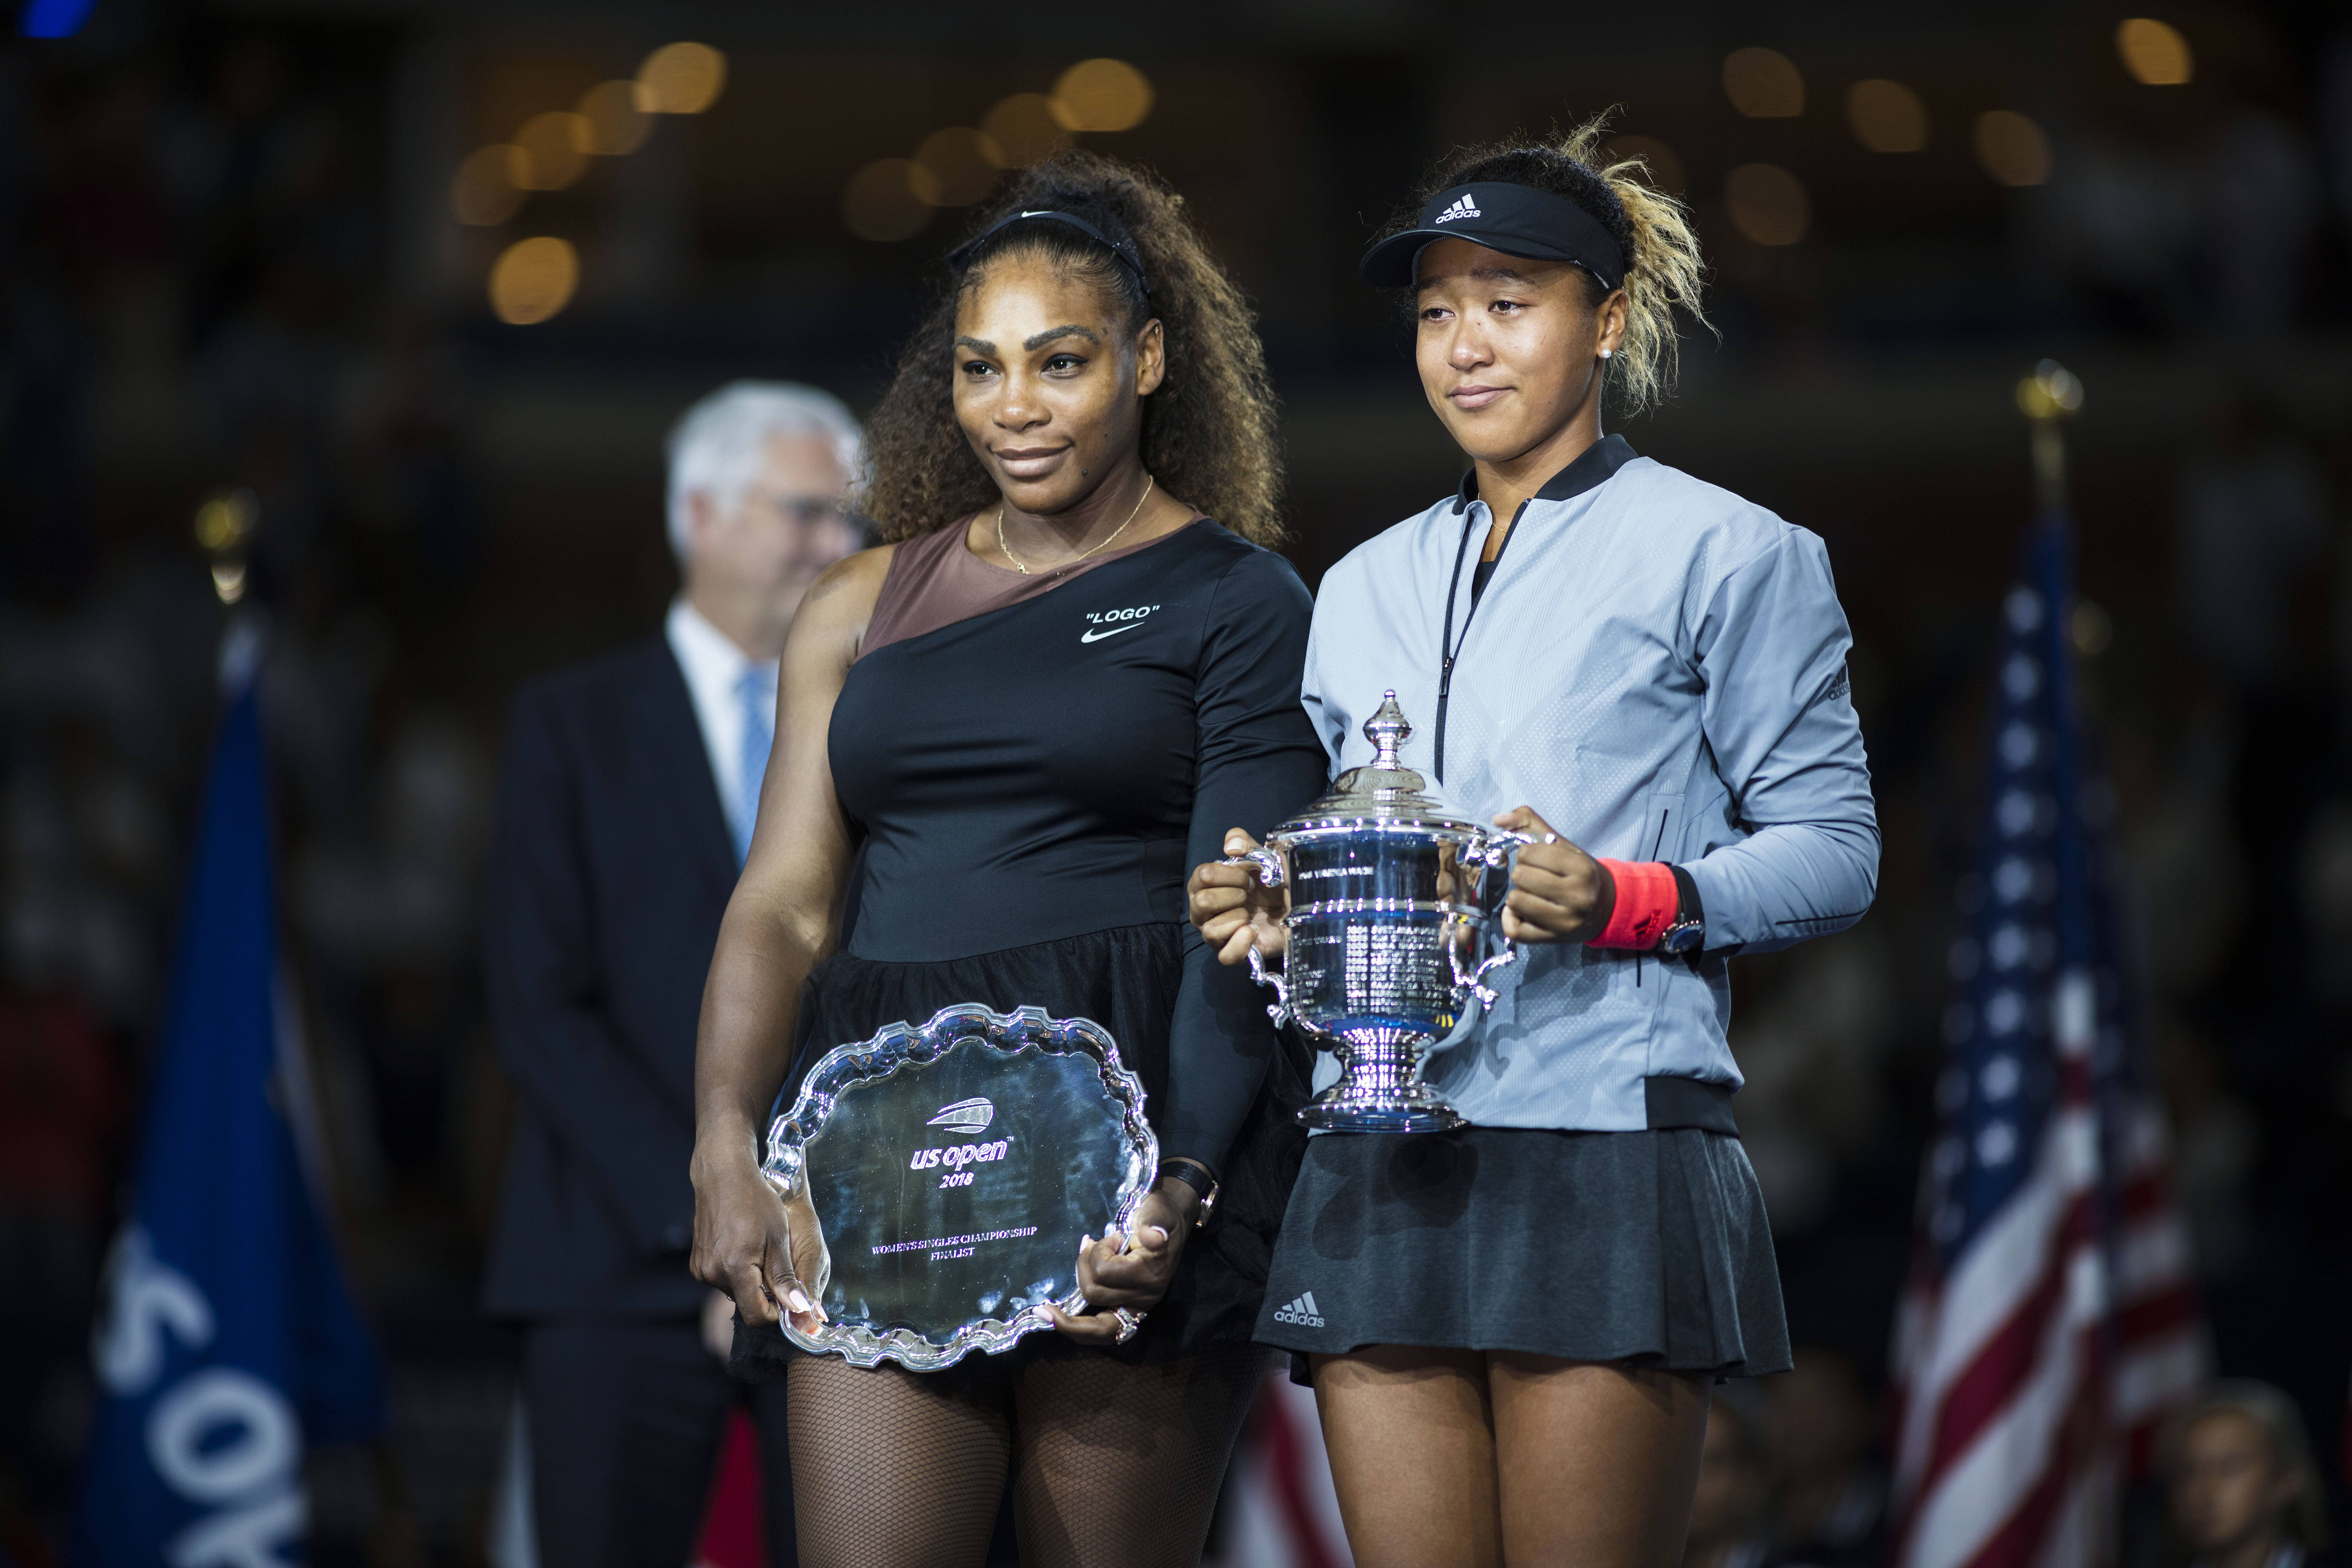 2018 US Open Tennis Tournament- Day Thirteen.  Naomi Osaka of Japan with the winners trophy and Serena Williams of the United States with the runners up trophy after the Women's Singles Final on Arthur Ashe Stadium at the 2018 US Open Tennis Tournament at the USTA Billie Jean King National Tennis Center on September 8th, 2018 in Flushing, Queens, New York City.  (Photo by Tim Clayton/Corbis via Getty Images)